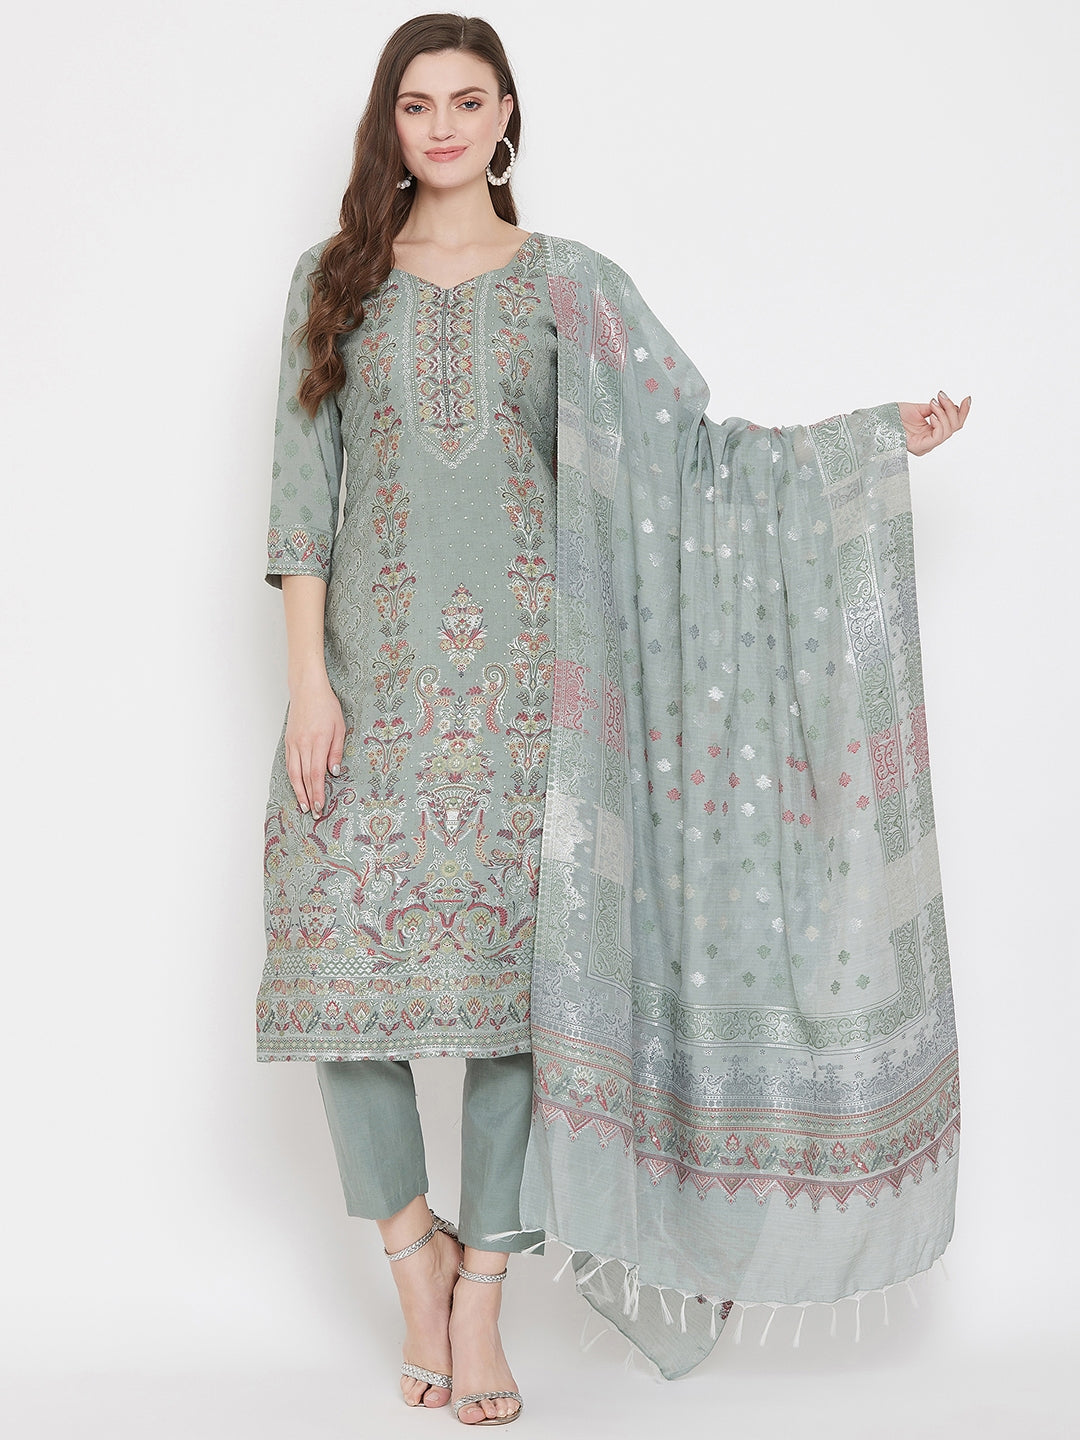 Organic Cotton Woven Light olive Dress Material with Dupatta